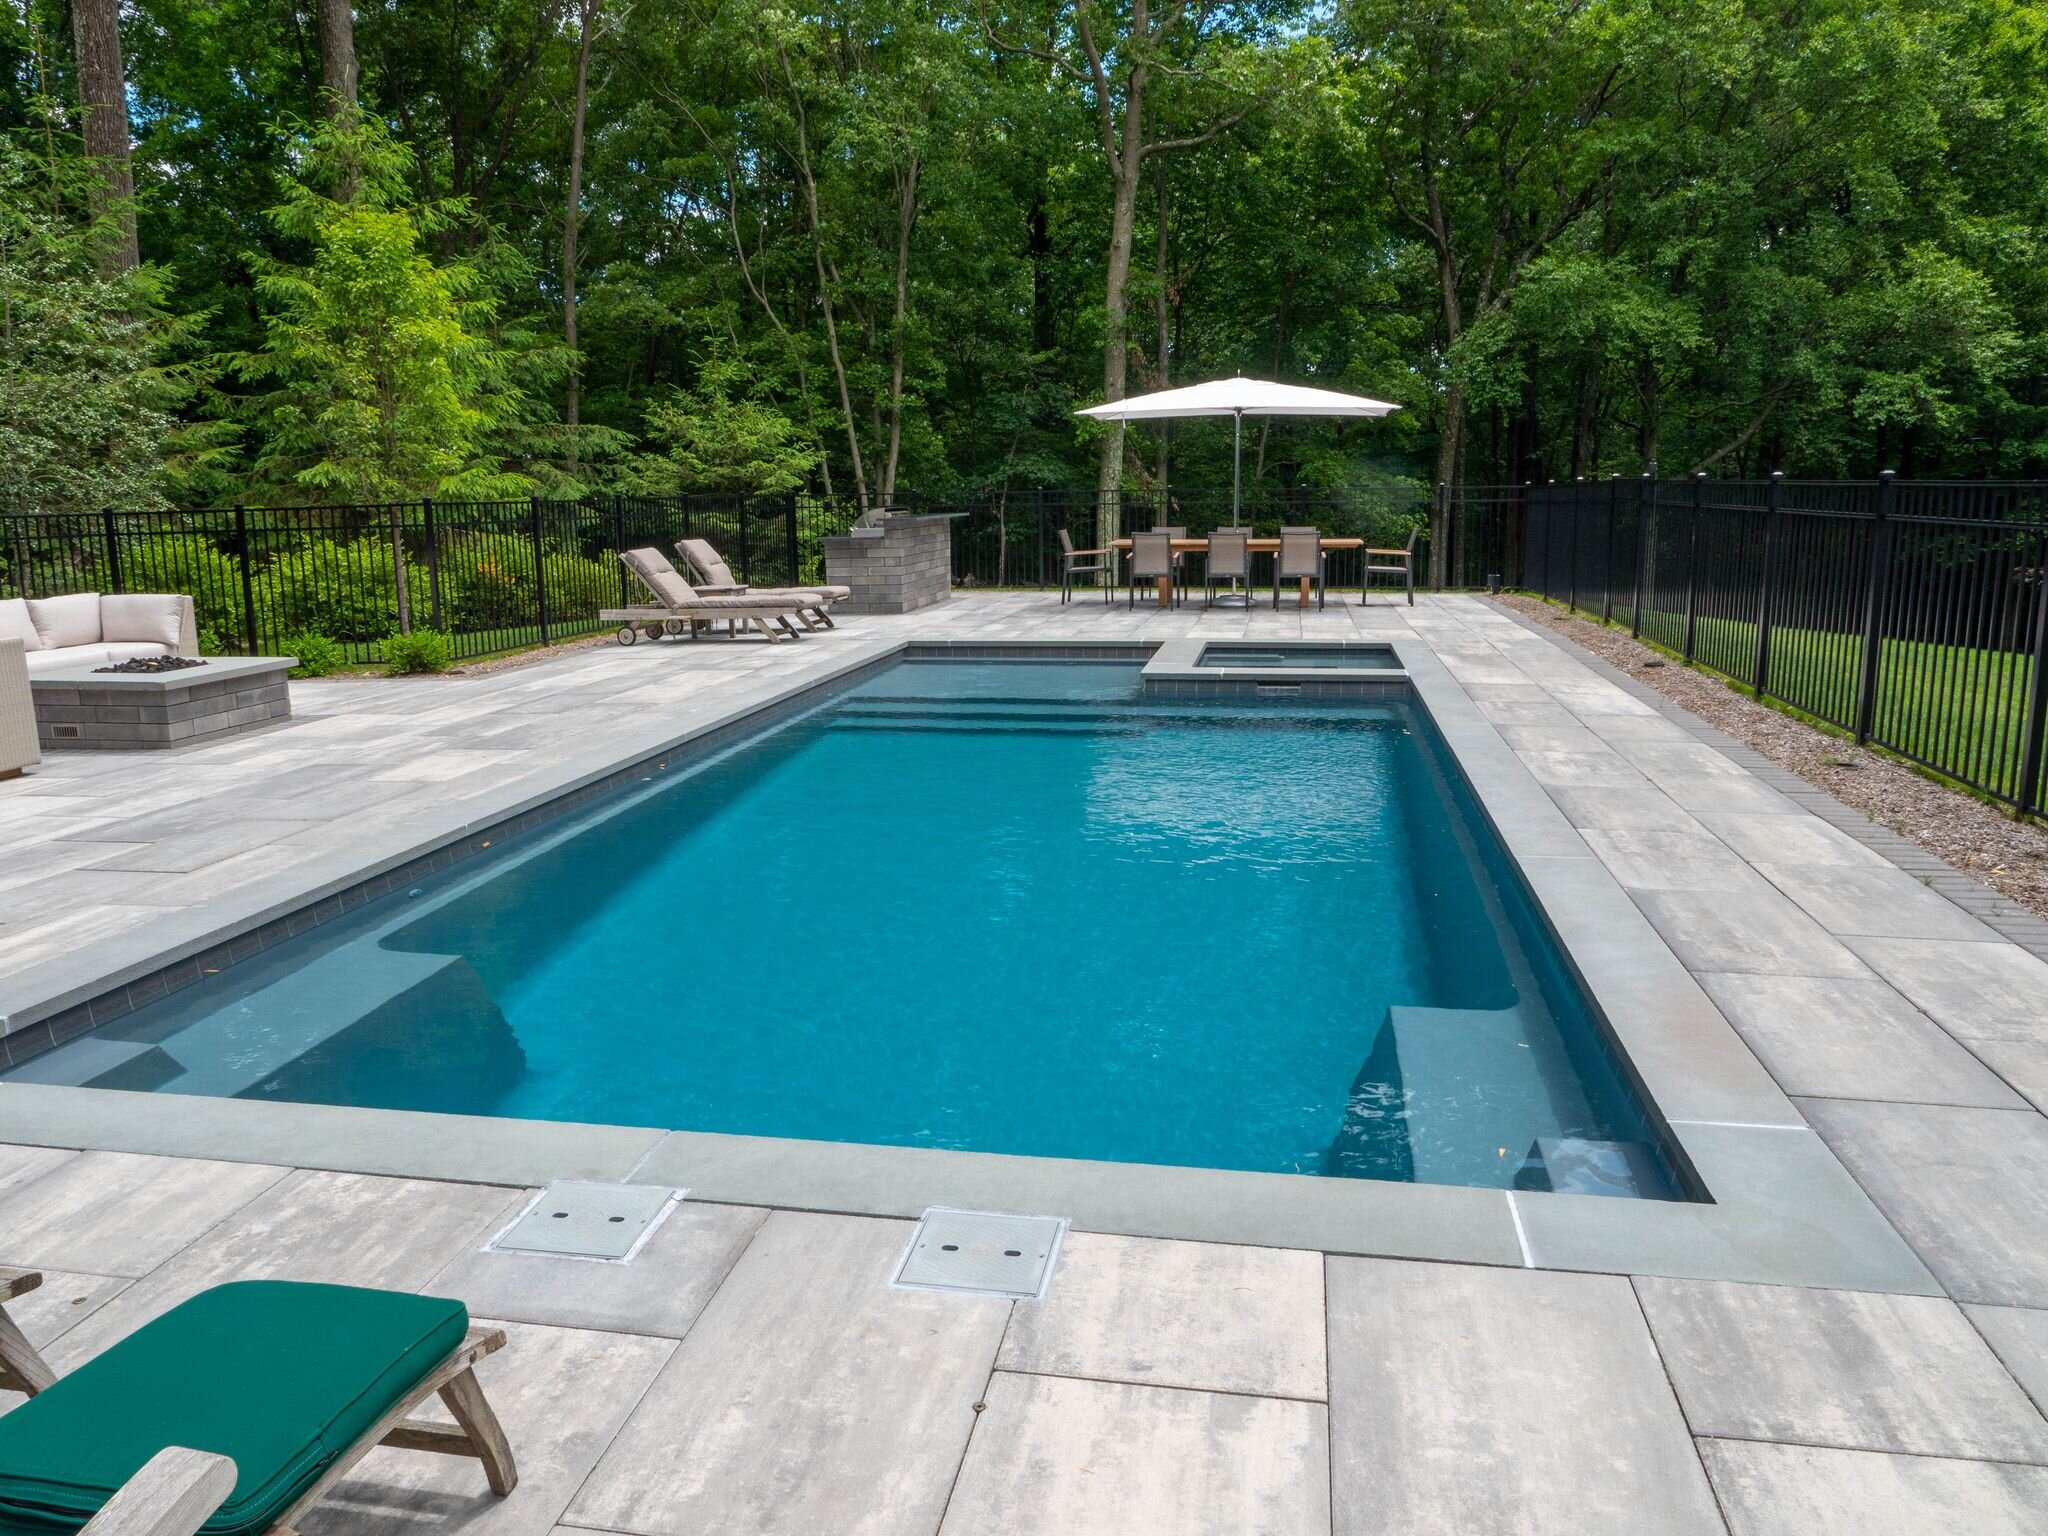 5 Pool Design Ideas For A Frequently, Inground Play Pool Designs